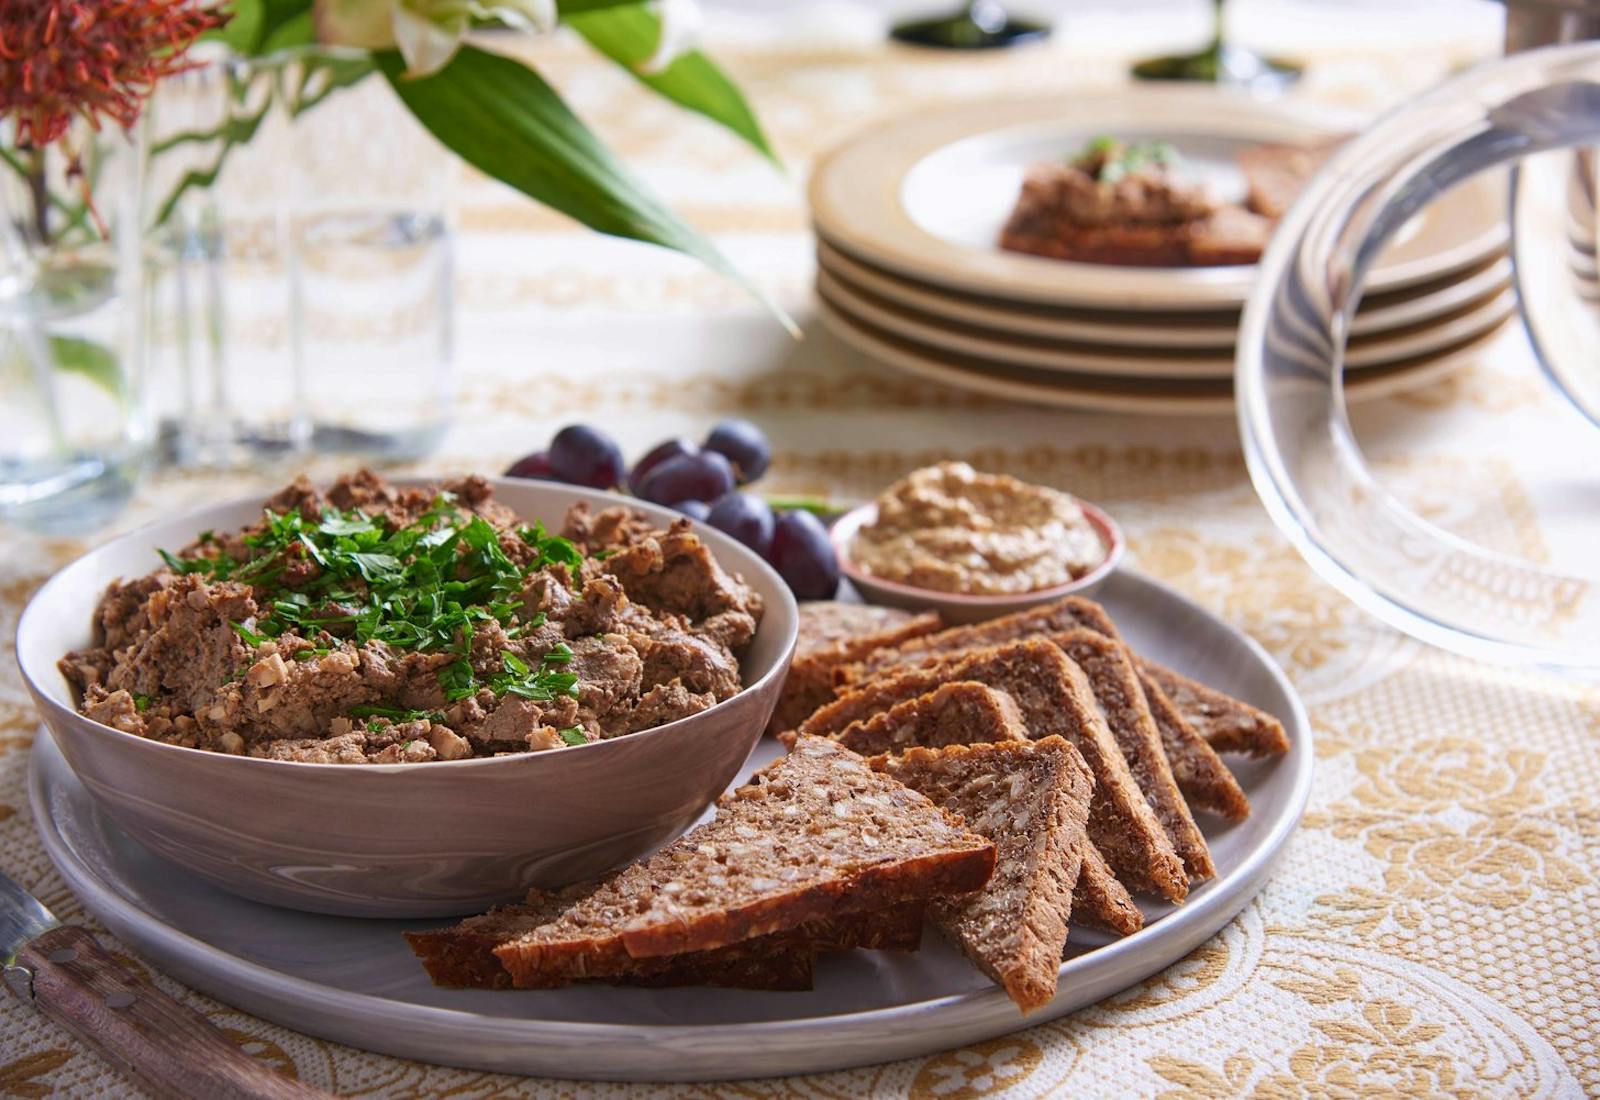 Chopped liver with chopped parsley alongside sliced seeded bread, grainy mustard and grapes, with fresh flower vase atop orange patterned tablecloth.